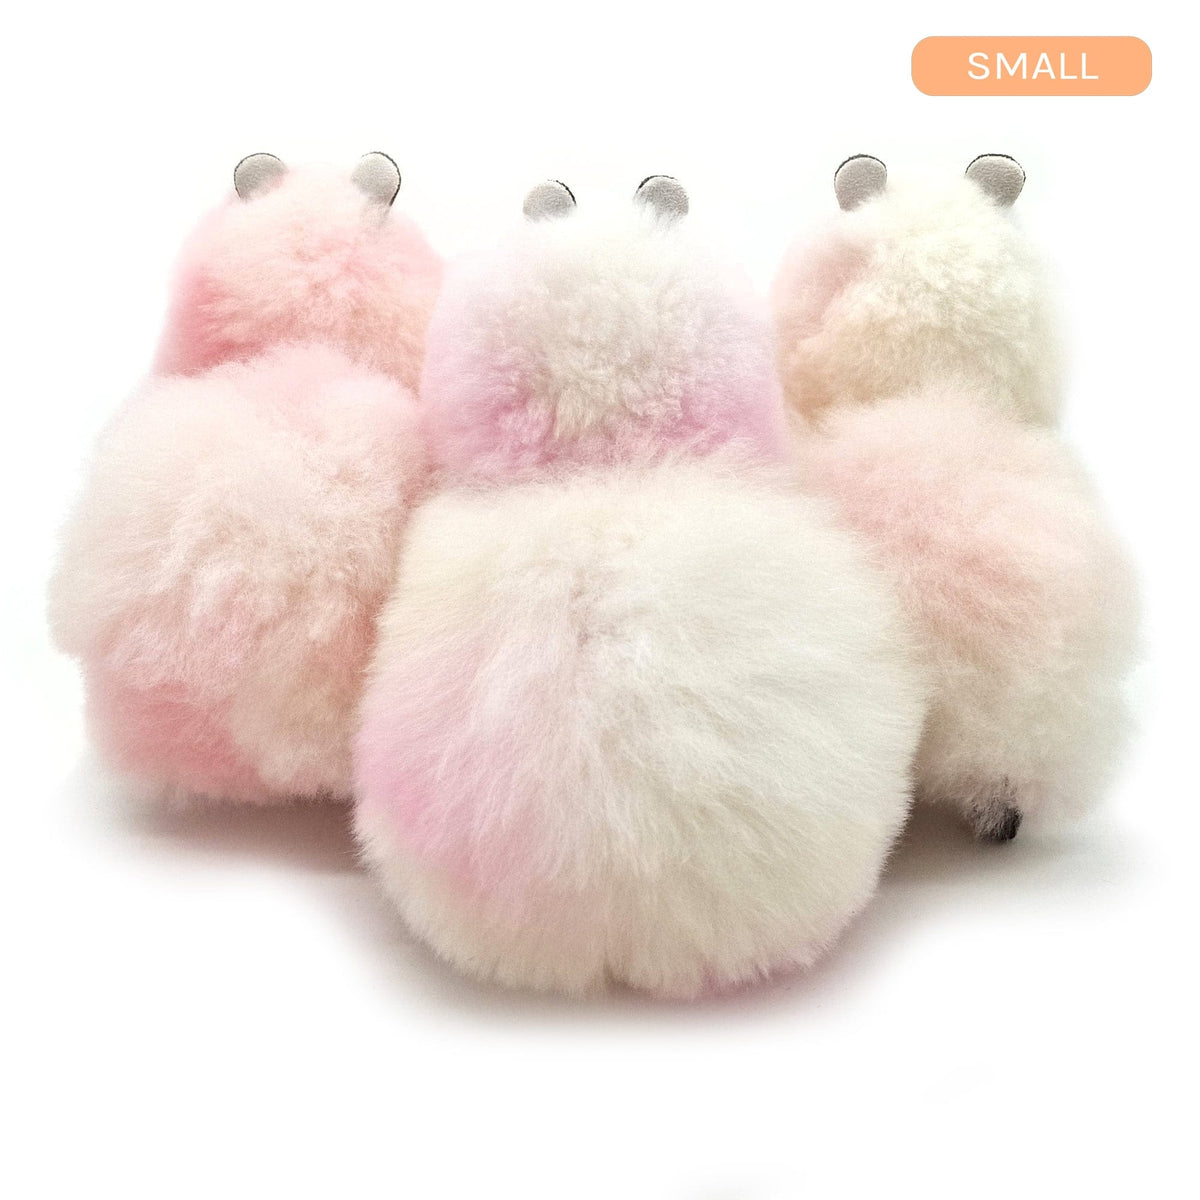 Cotton Candy Cloud - Small Alpaca Toy (23cm) - Limited Edition